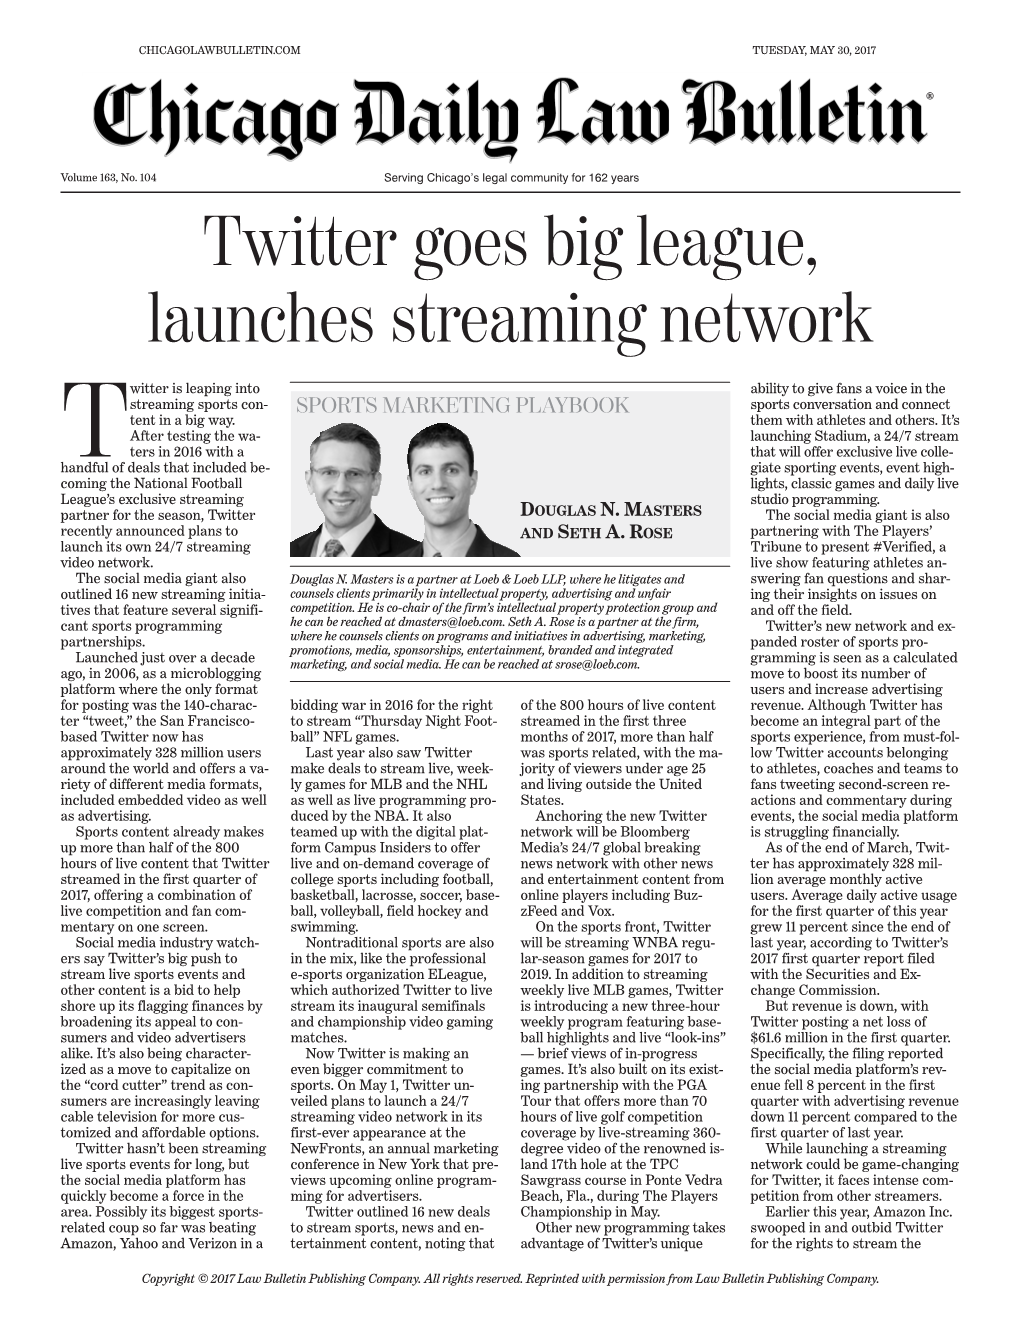 Twitter Goes Big League, Launches Streaming Network